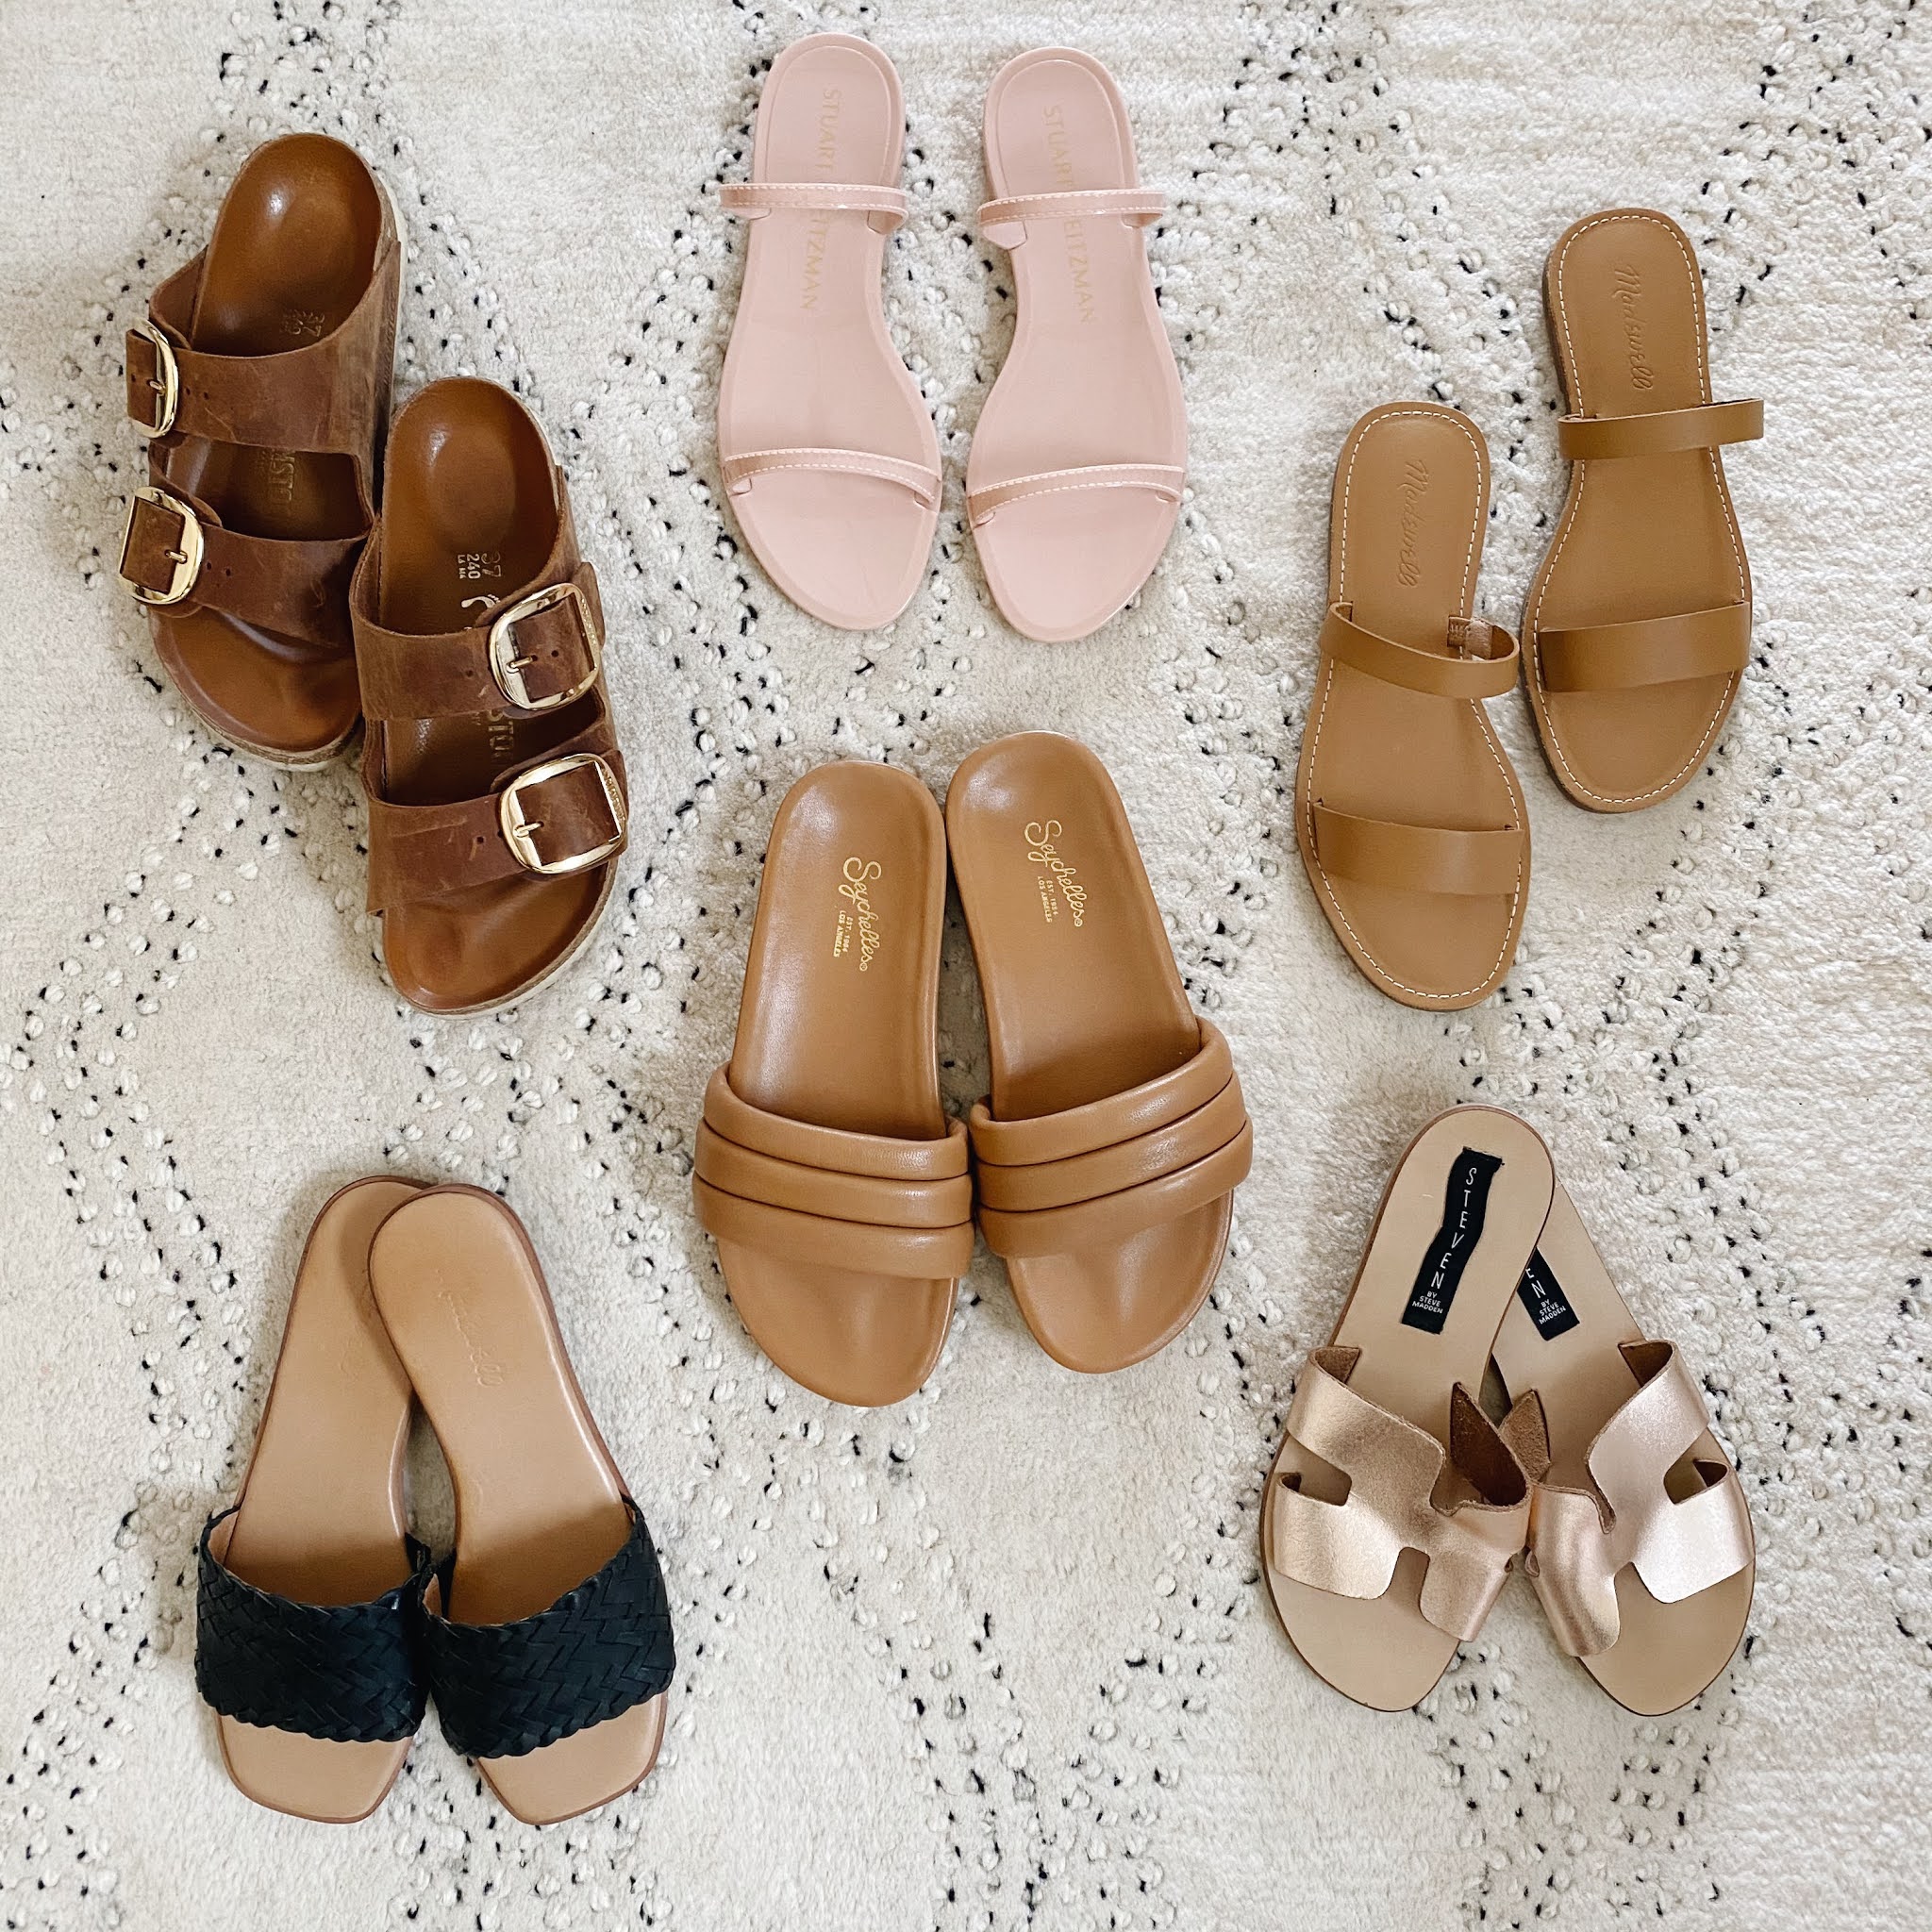 jillgg's good life (for less) | a west michigan style blog: sandals I'm ...